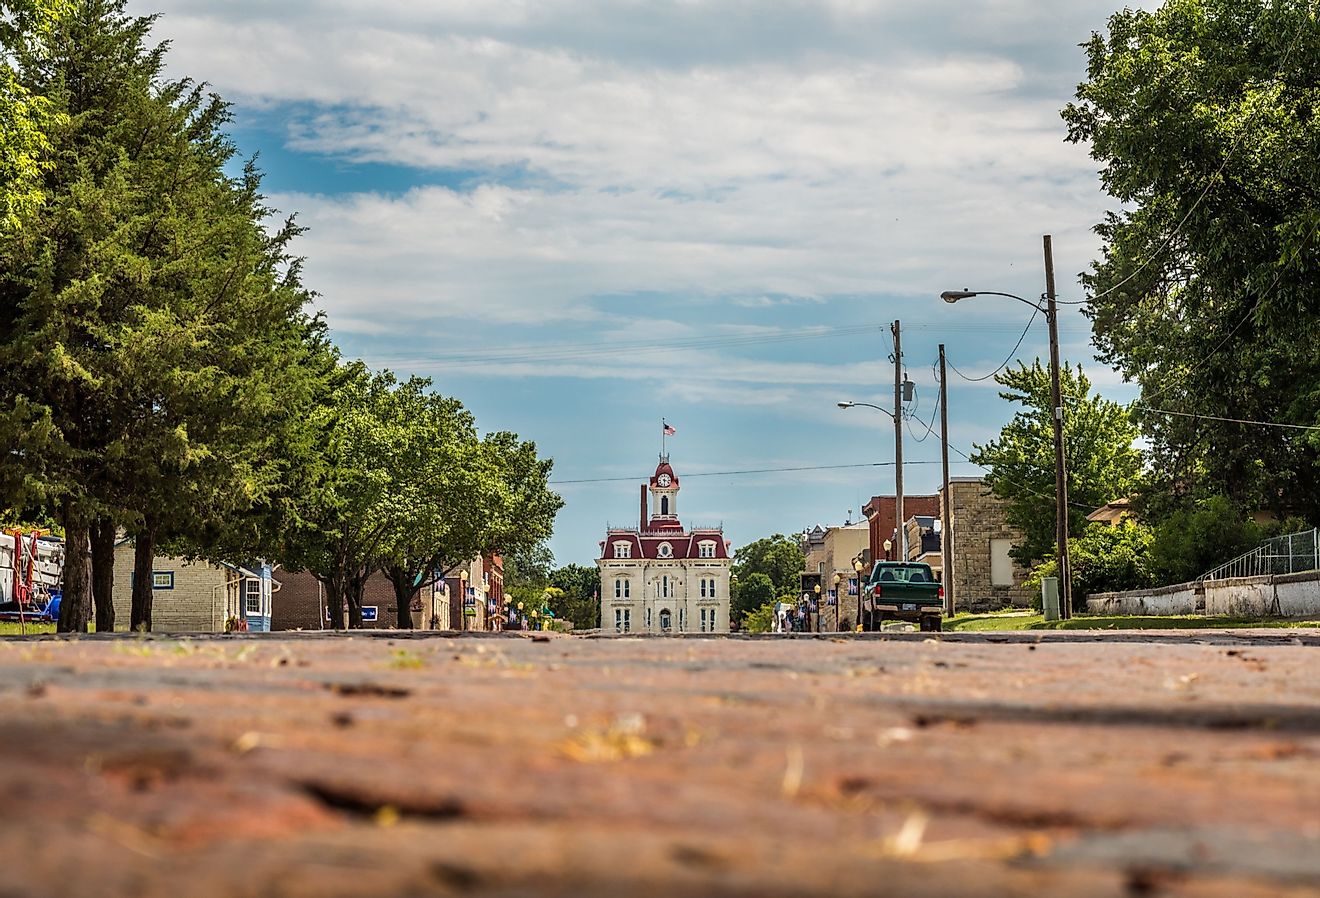 The old downtown area of Cottonwood Falls, Kansas.